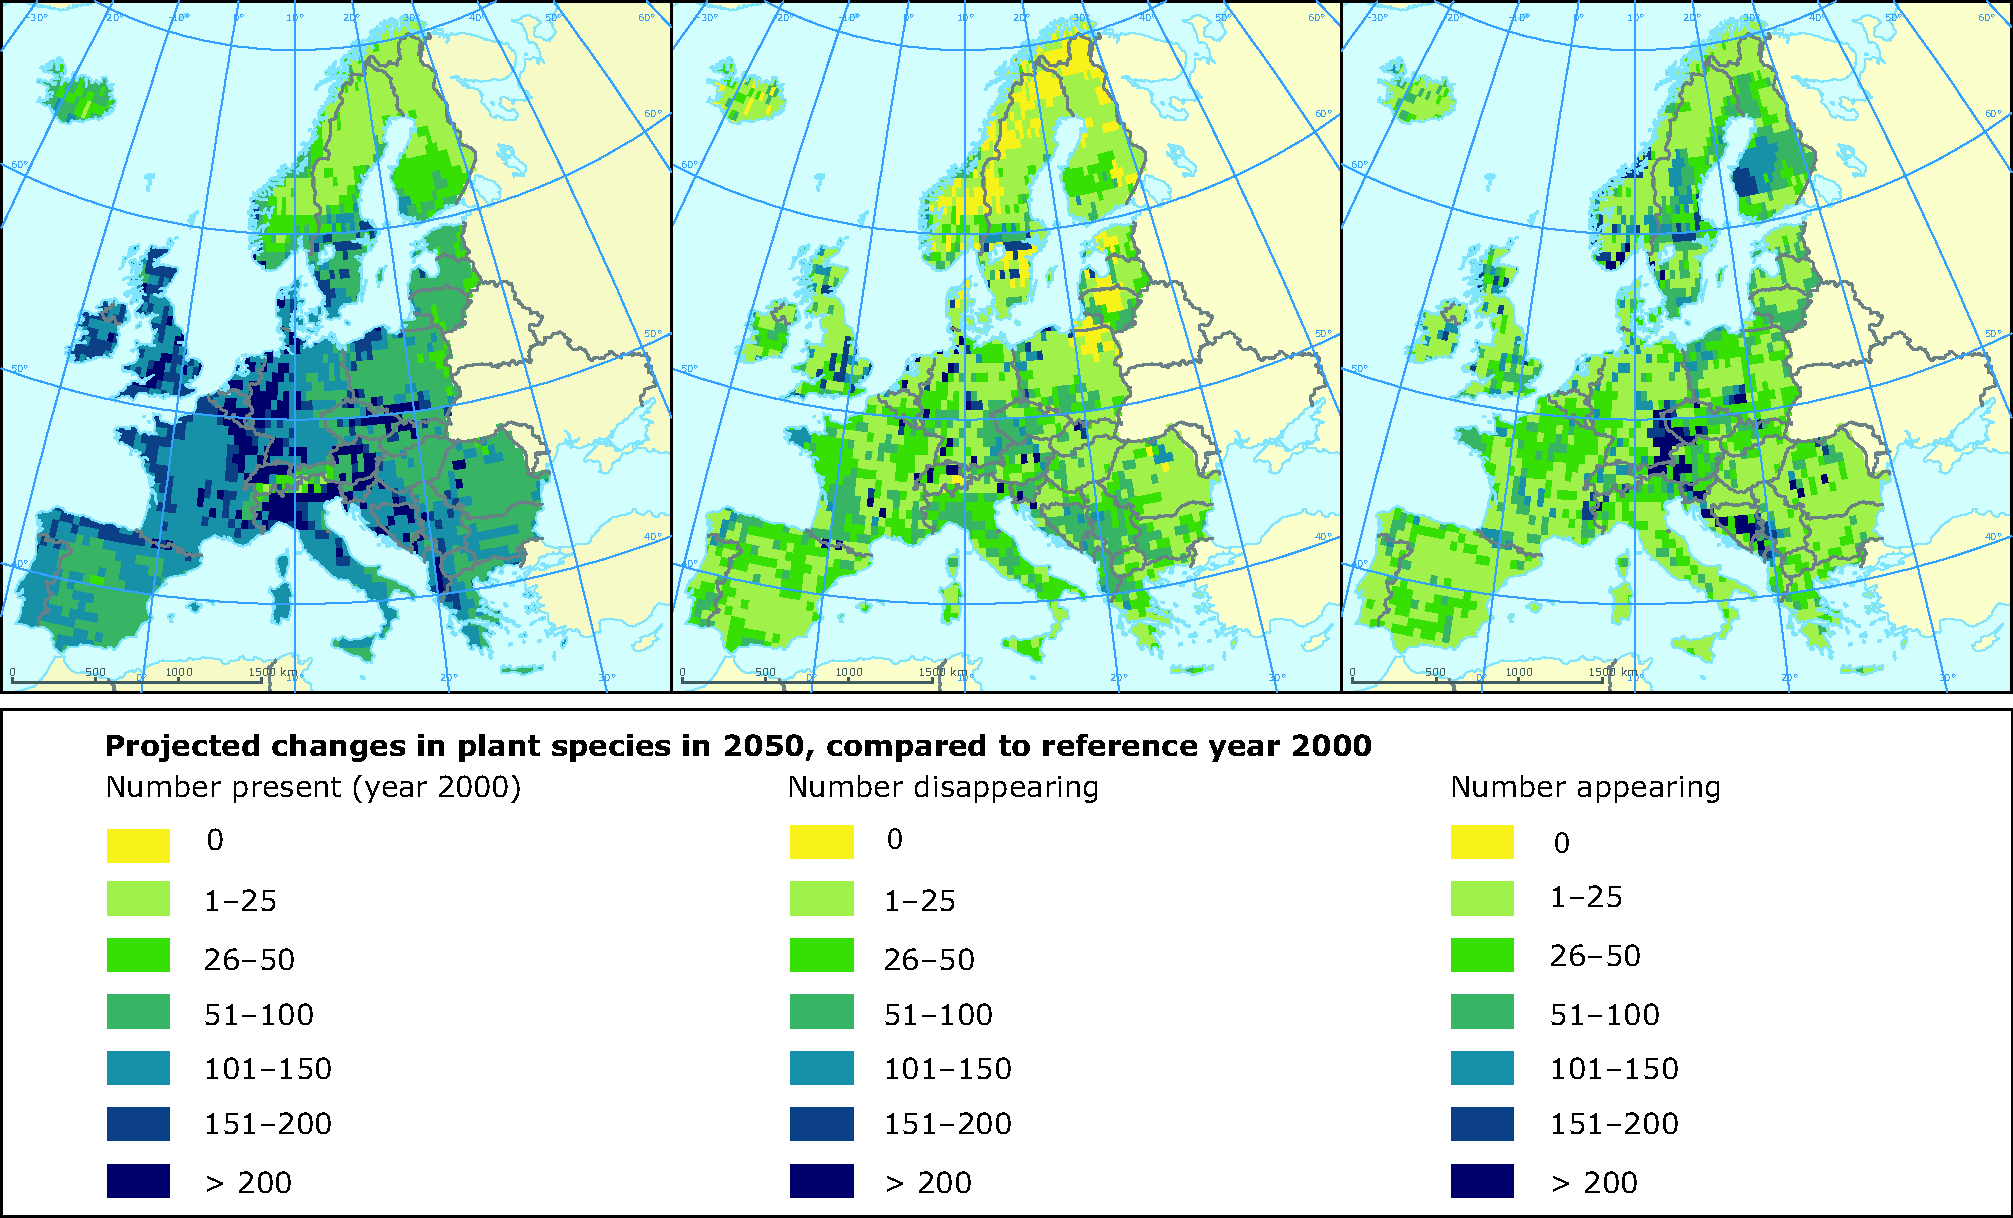 Projected changes in number of plant species in 2050